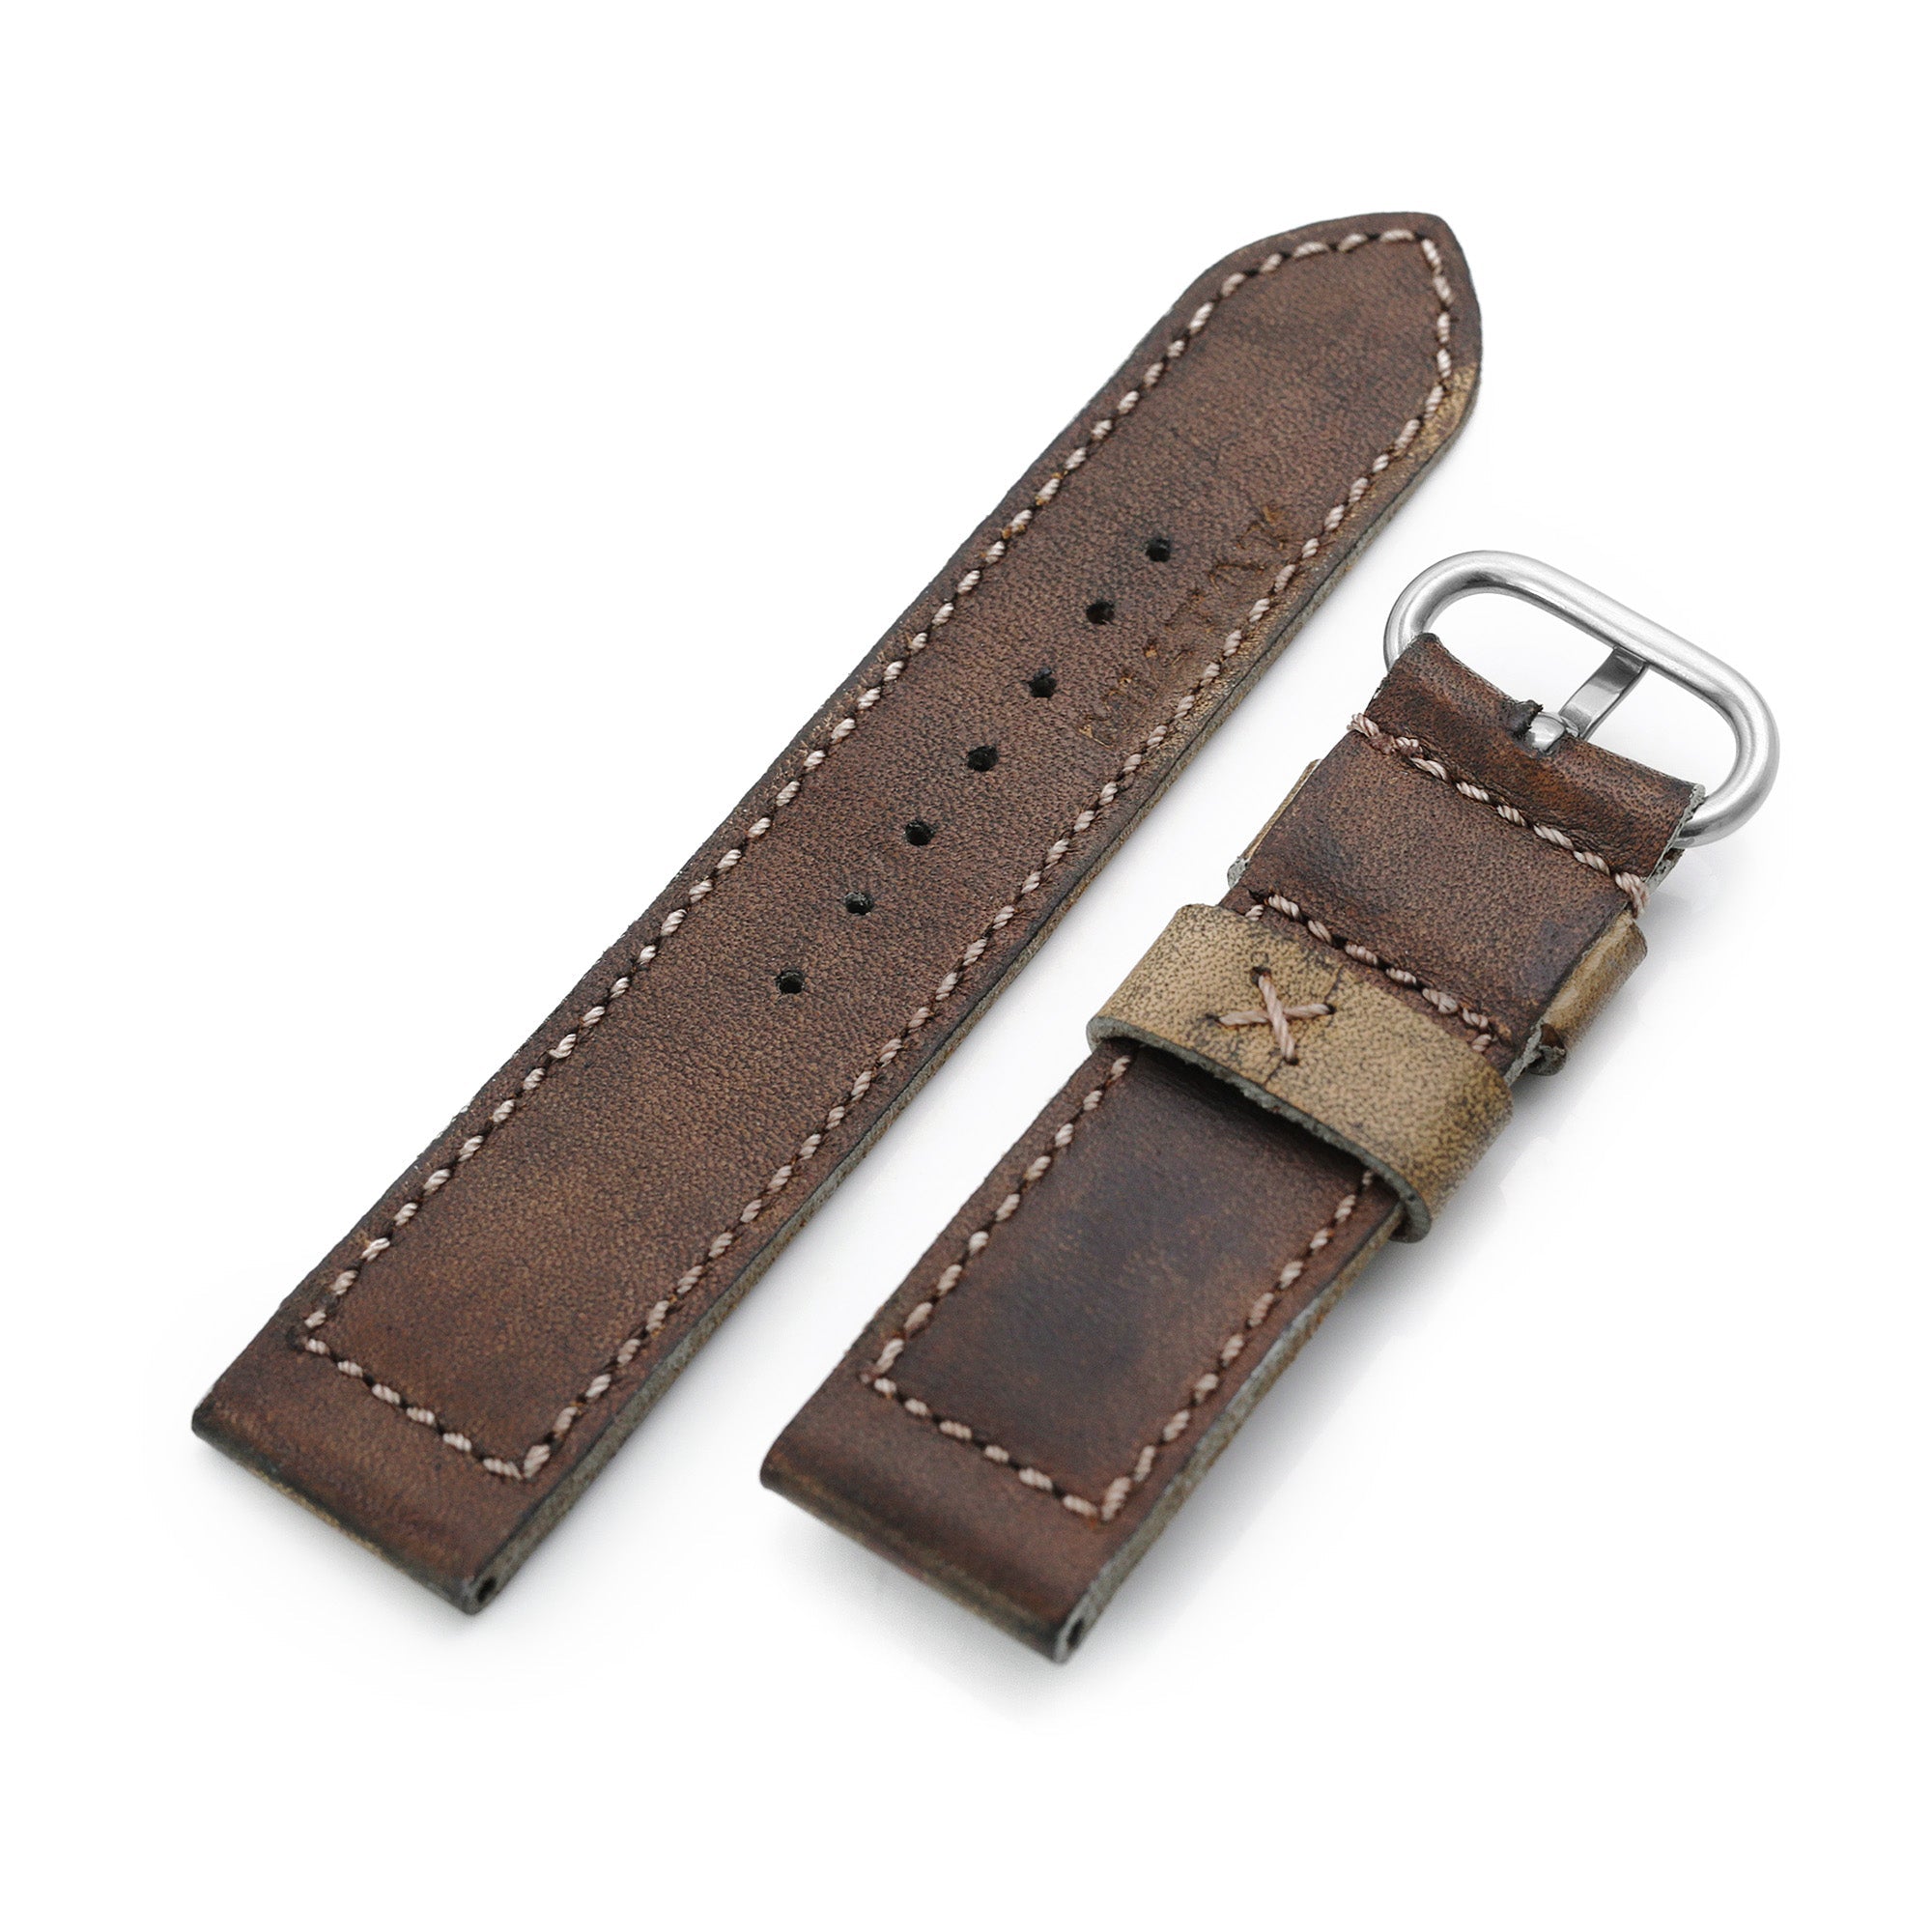 22mm Gunny X MT MISSION POSSIBLE 1 (MP1) Series Vintage Brown Leather Watch Strap Strapcode Watch Bands